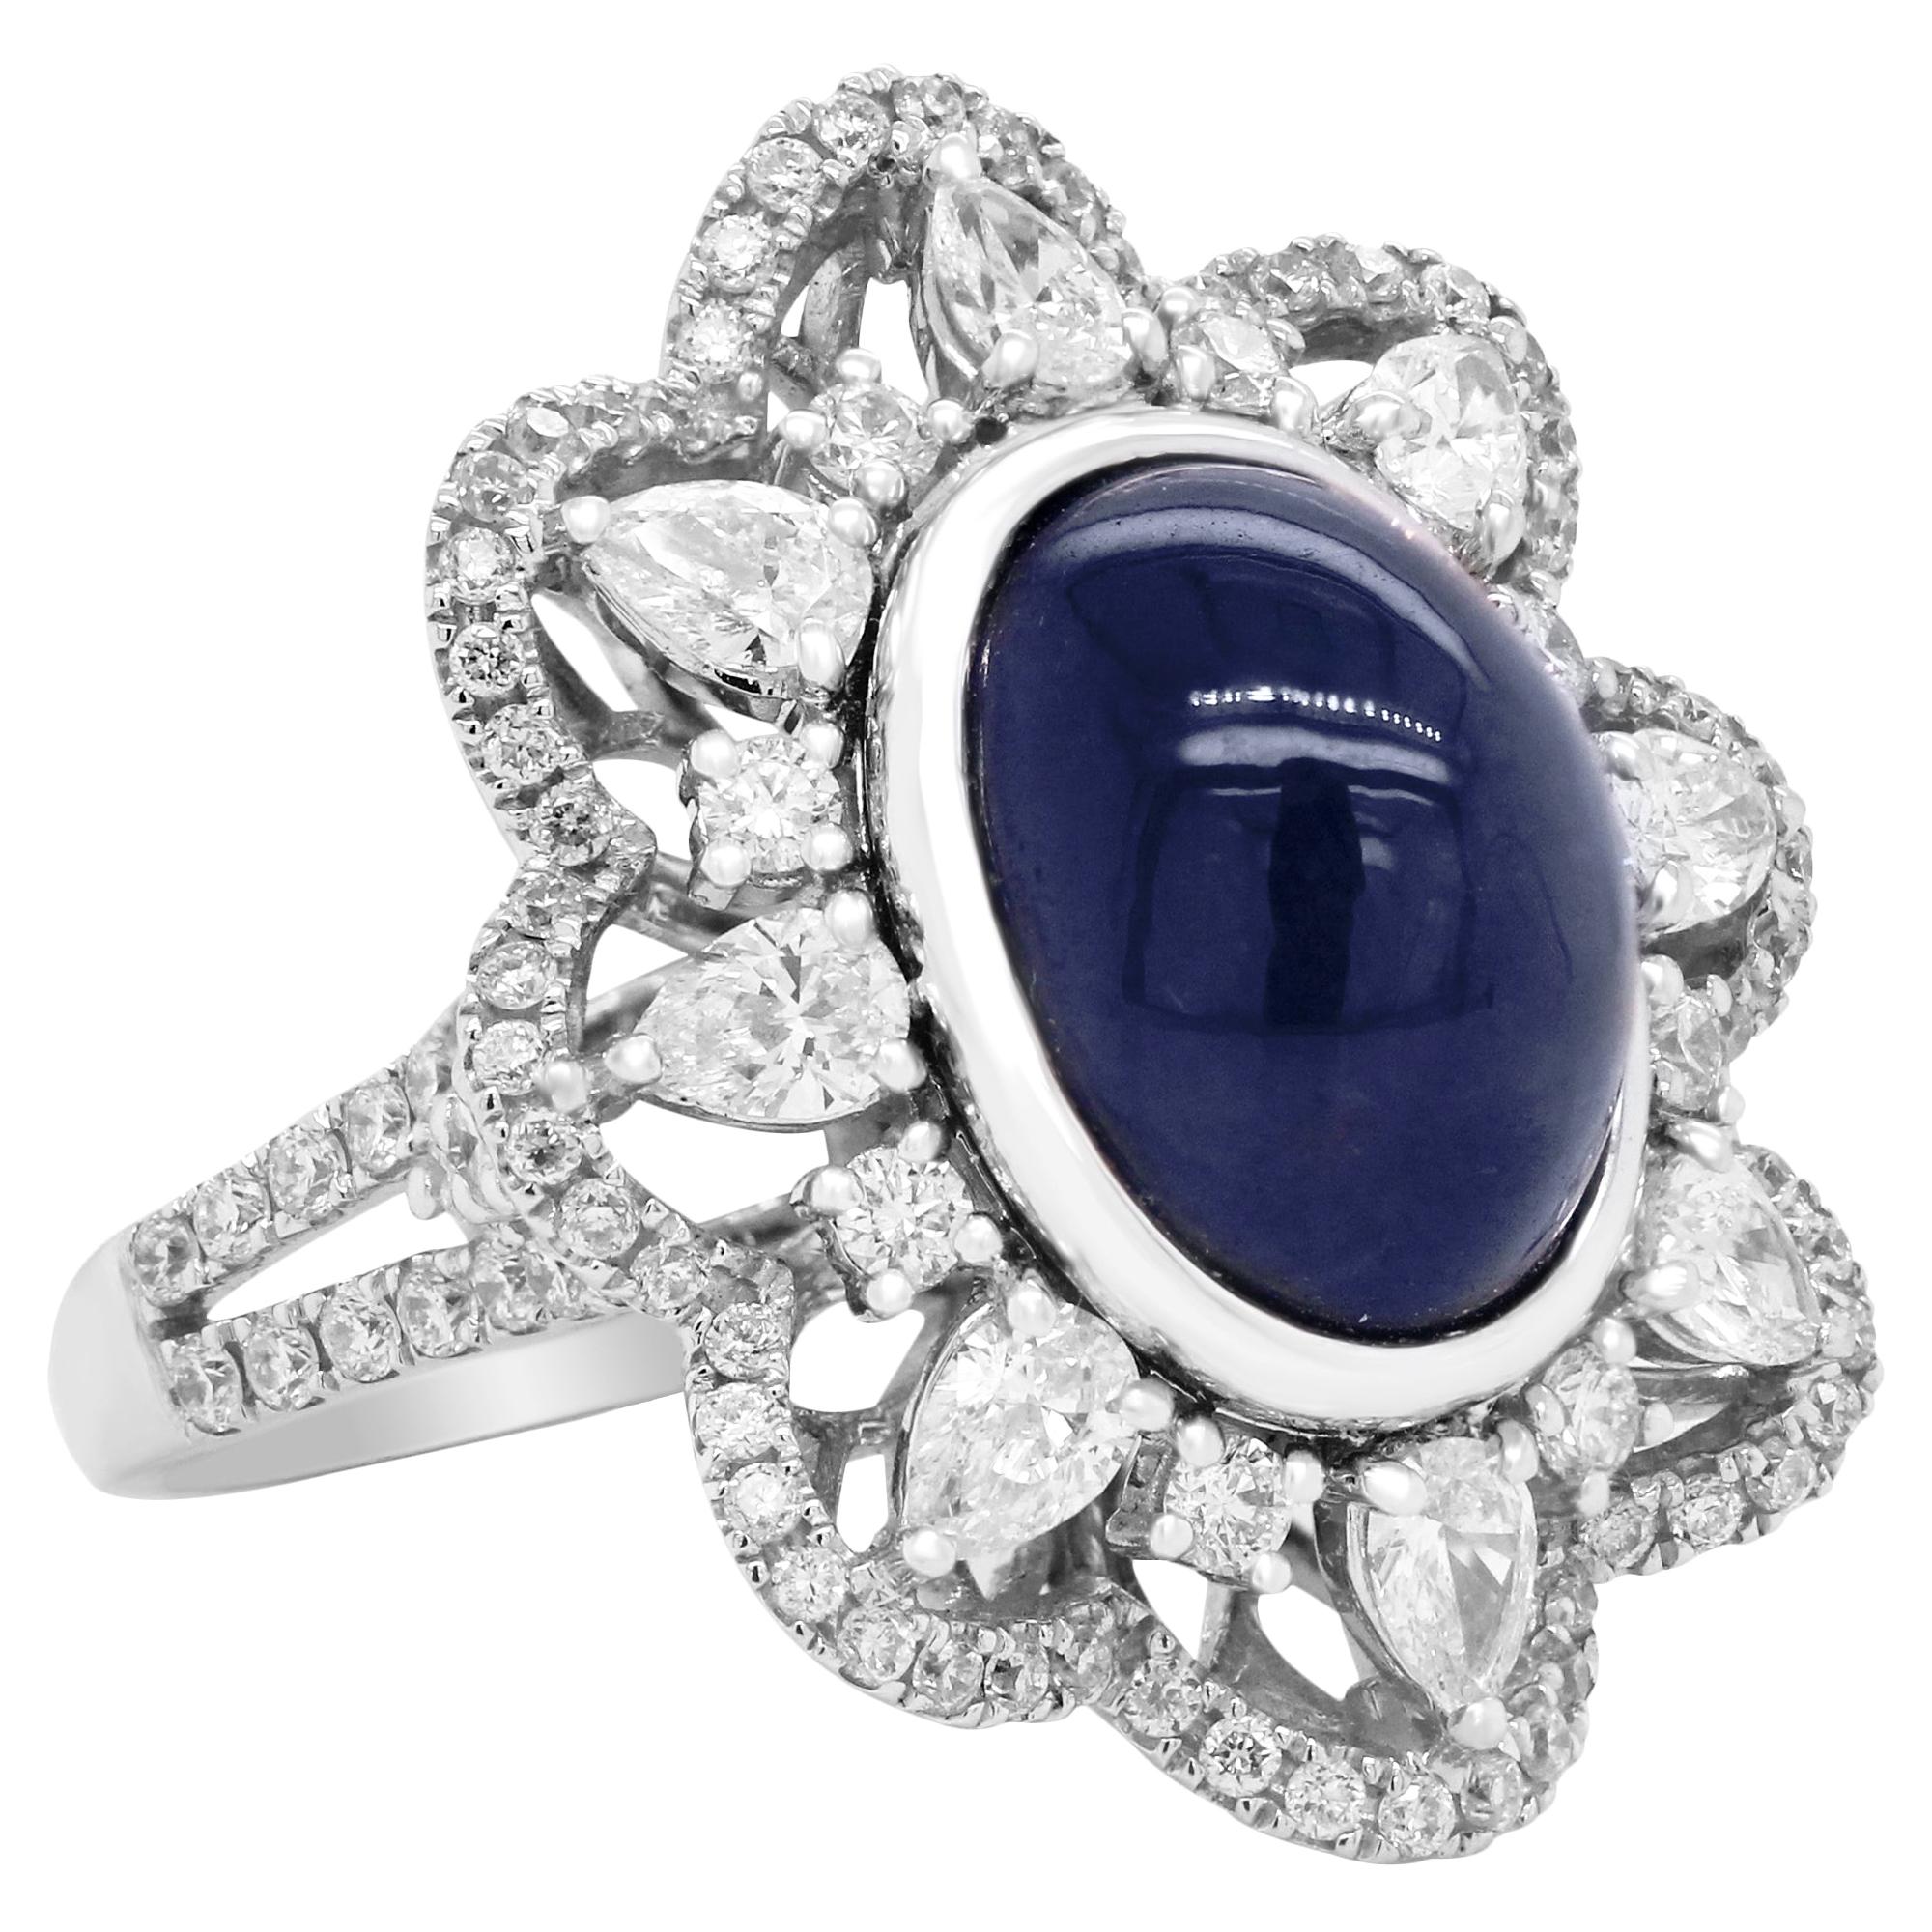 White Gold Pear Shape and Round Diamond Ring with Cabochon Blue Sapphire Center